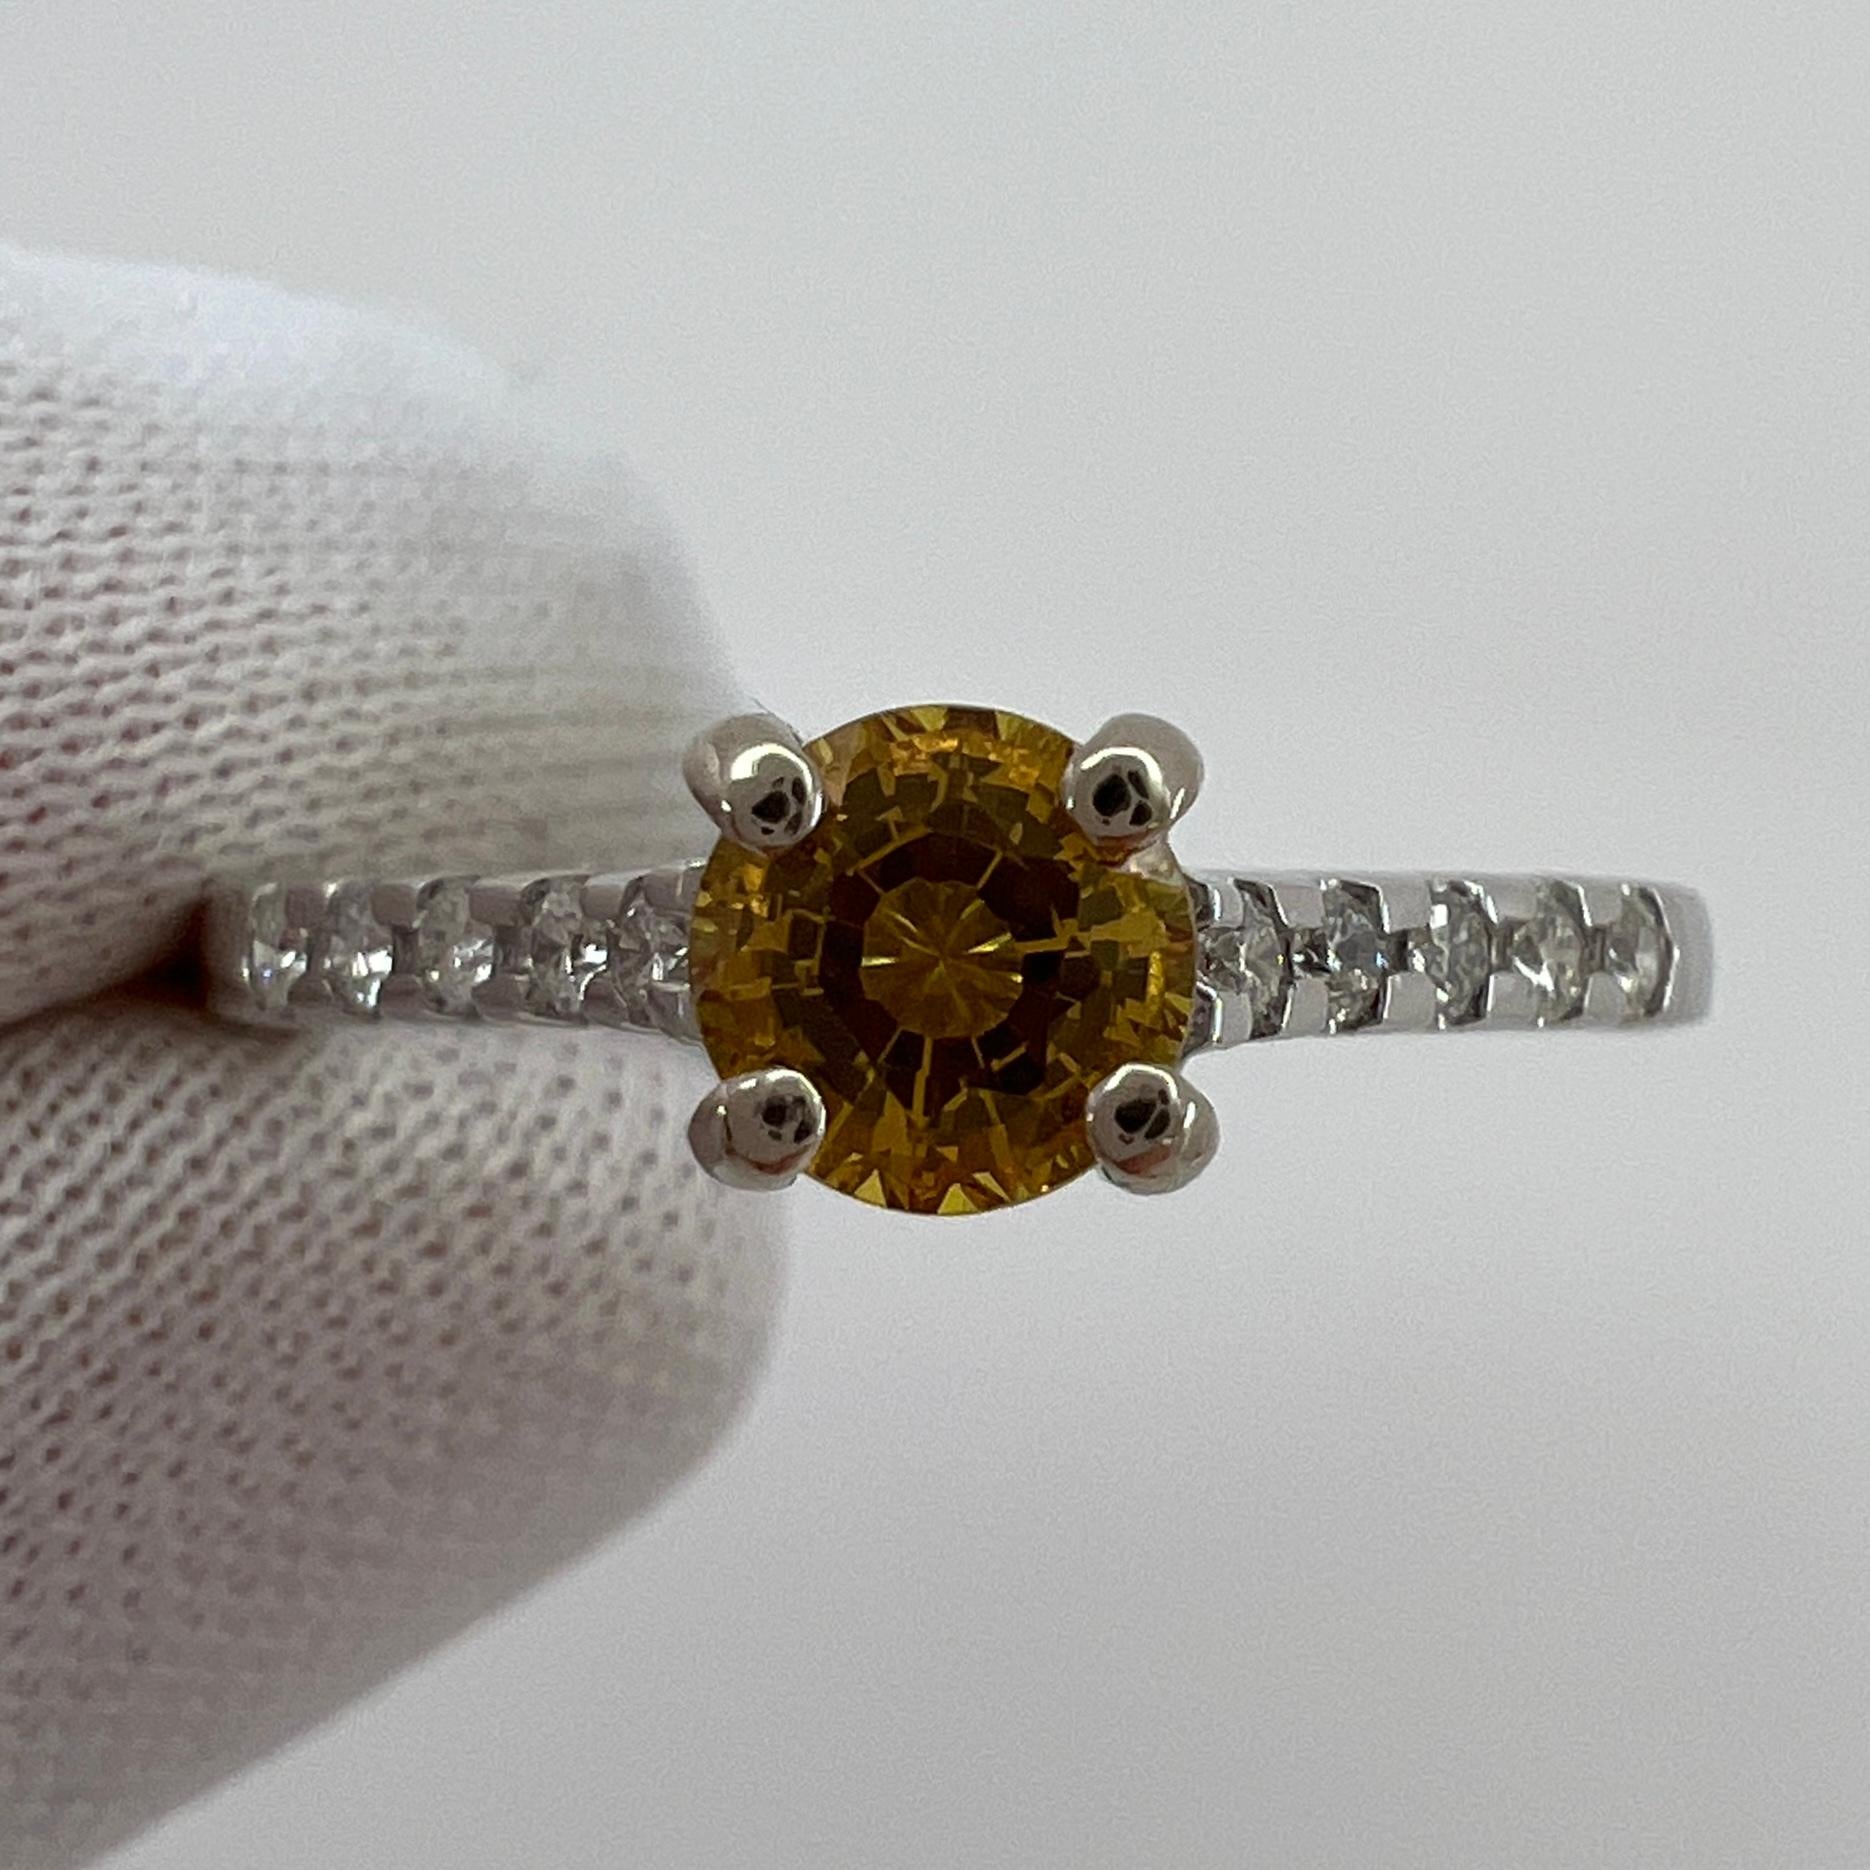 Natural Vivid Yellow Orange Ceylon Sapphire & Diamond Ring.

0.63 Carat centre sapphire with a beautiful deep but vivid colour and superb clarity. very clean stone.

Fully certified by IGI Antwerp confirming stone as untreated unheated and Sri